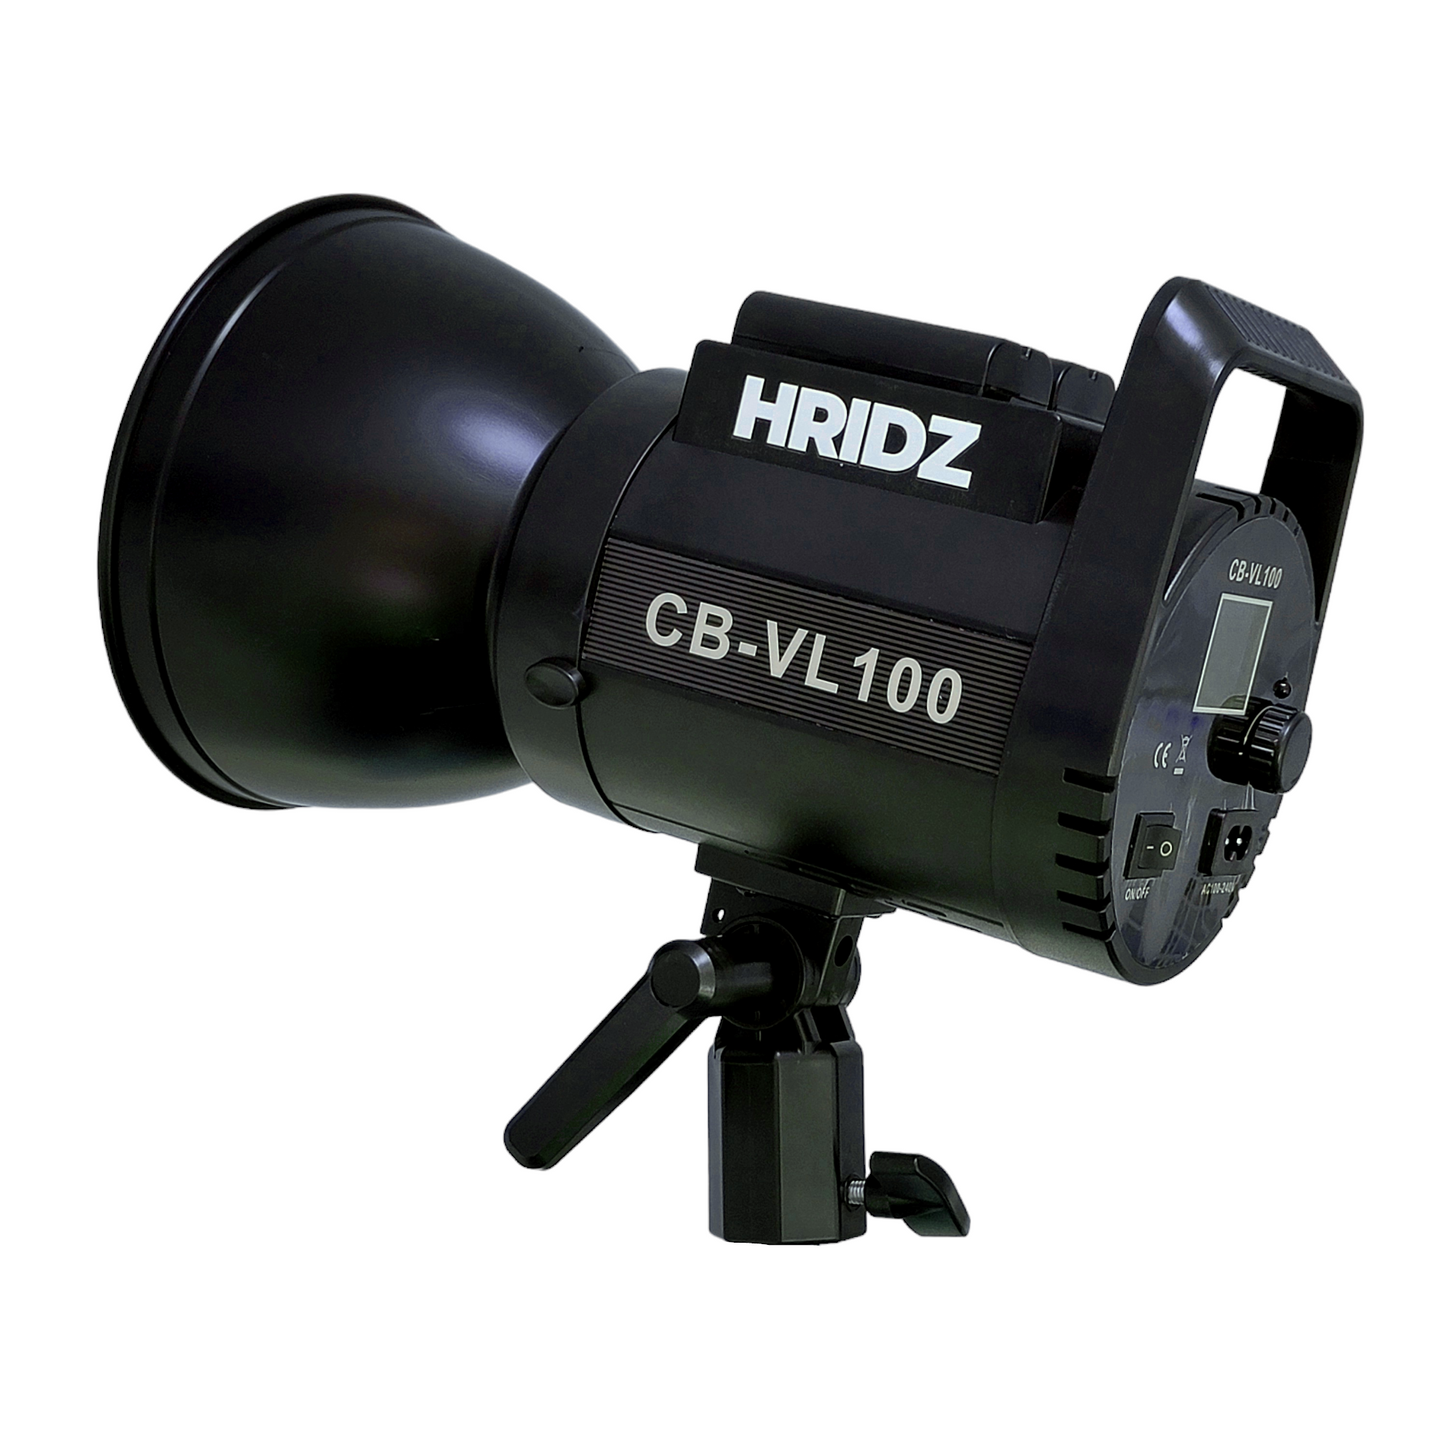 HRIDZ CB-VL100 100W Battery-Operated Bi-Colour LED Video Light Professional Outdoor Indoor Video Light, Remote Controlled